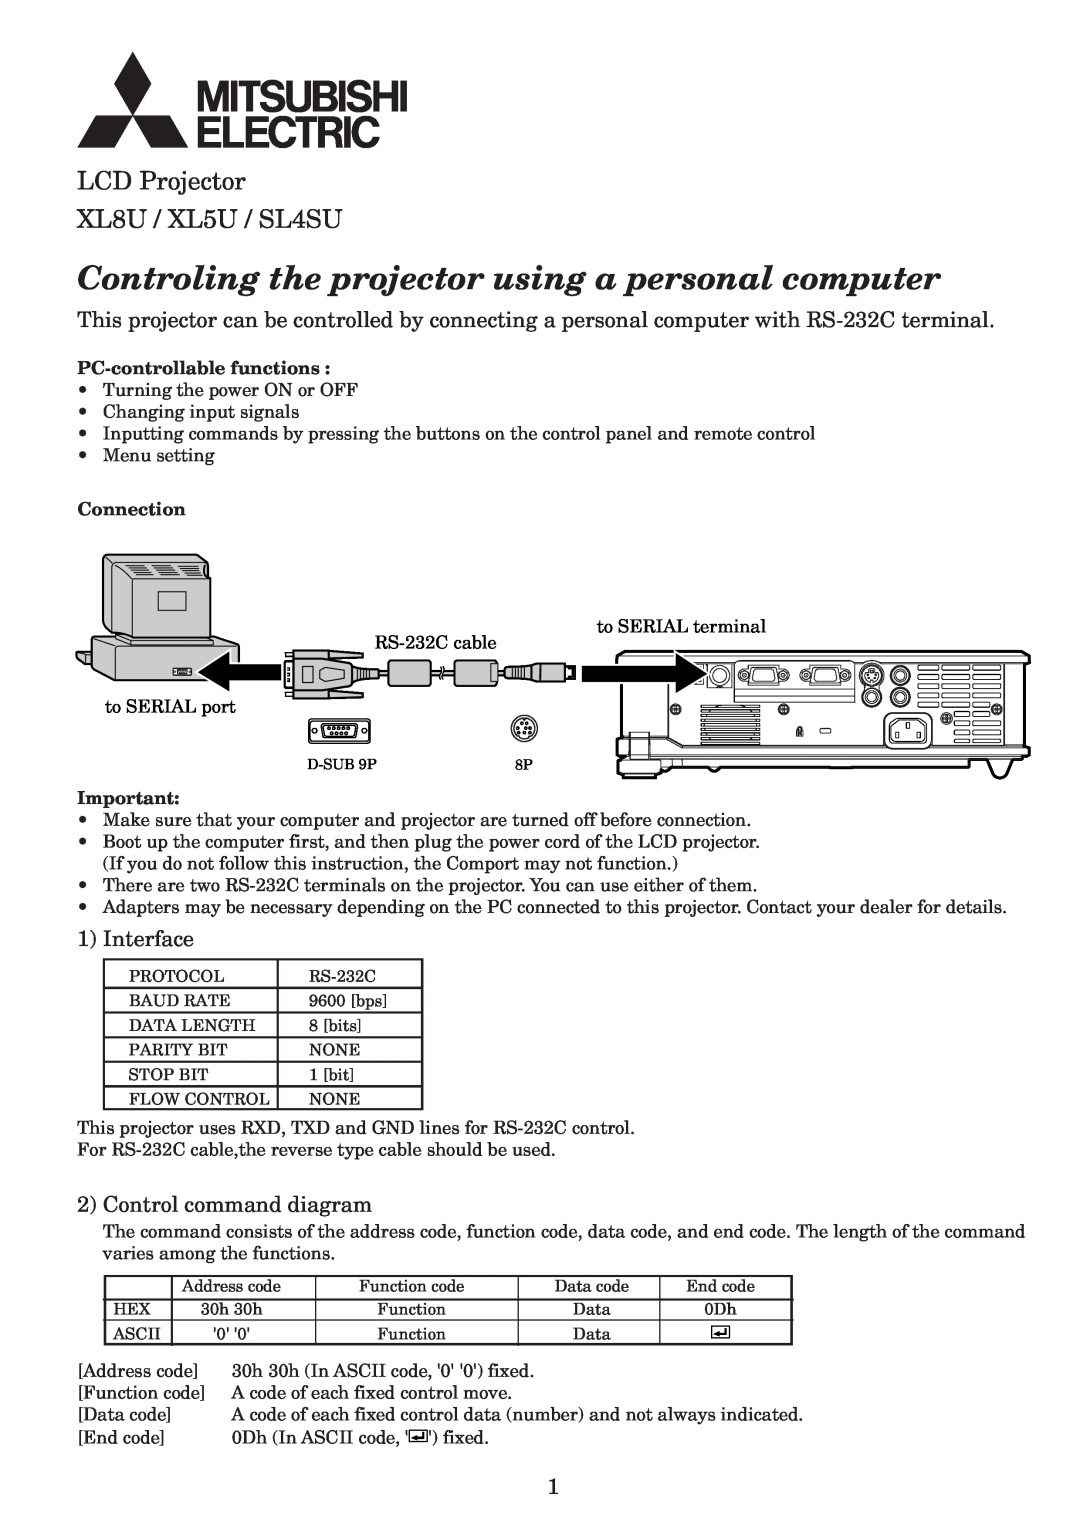 Mitsubishi Electronics manual XL5U/SL4SU, Simple yet Powerful It’s the Center of Attention, Newly designed compact body 